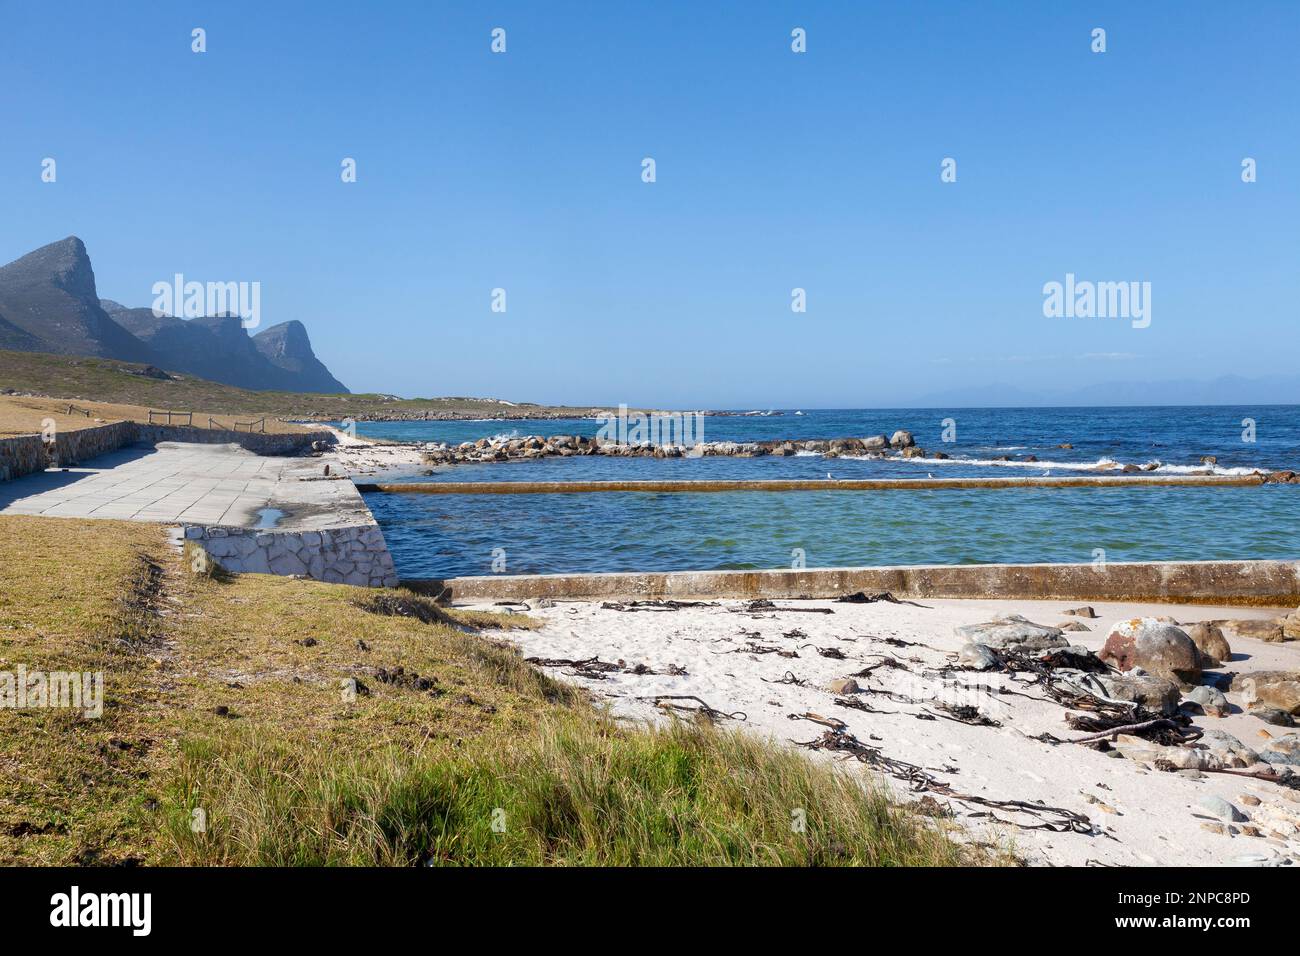 The tidal pool and picnic site at Buffels Bay Beach, Cape Point Nature Reserve, Cape Peninsula, Western Cape, South Africa Stock Photo